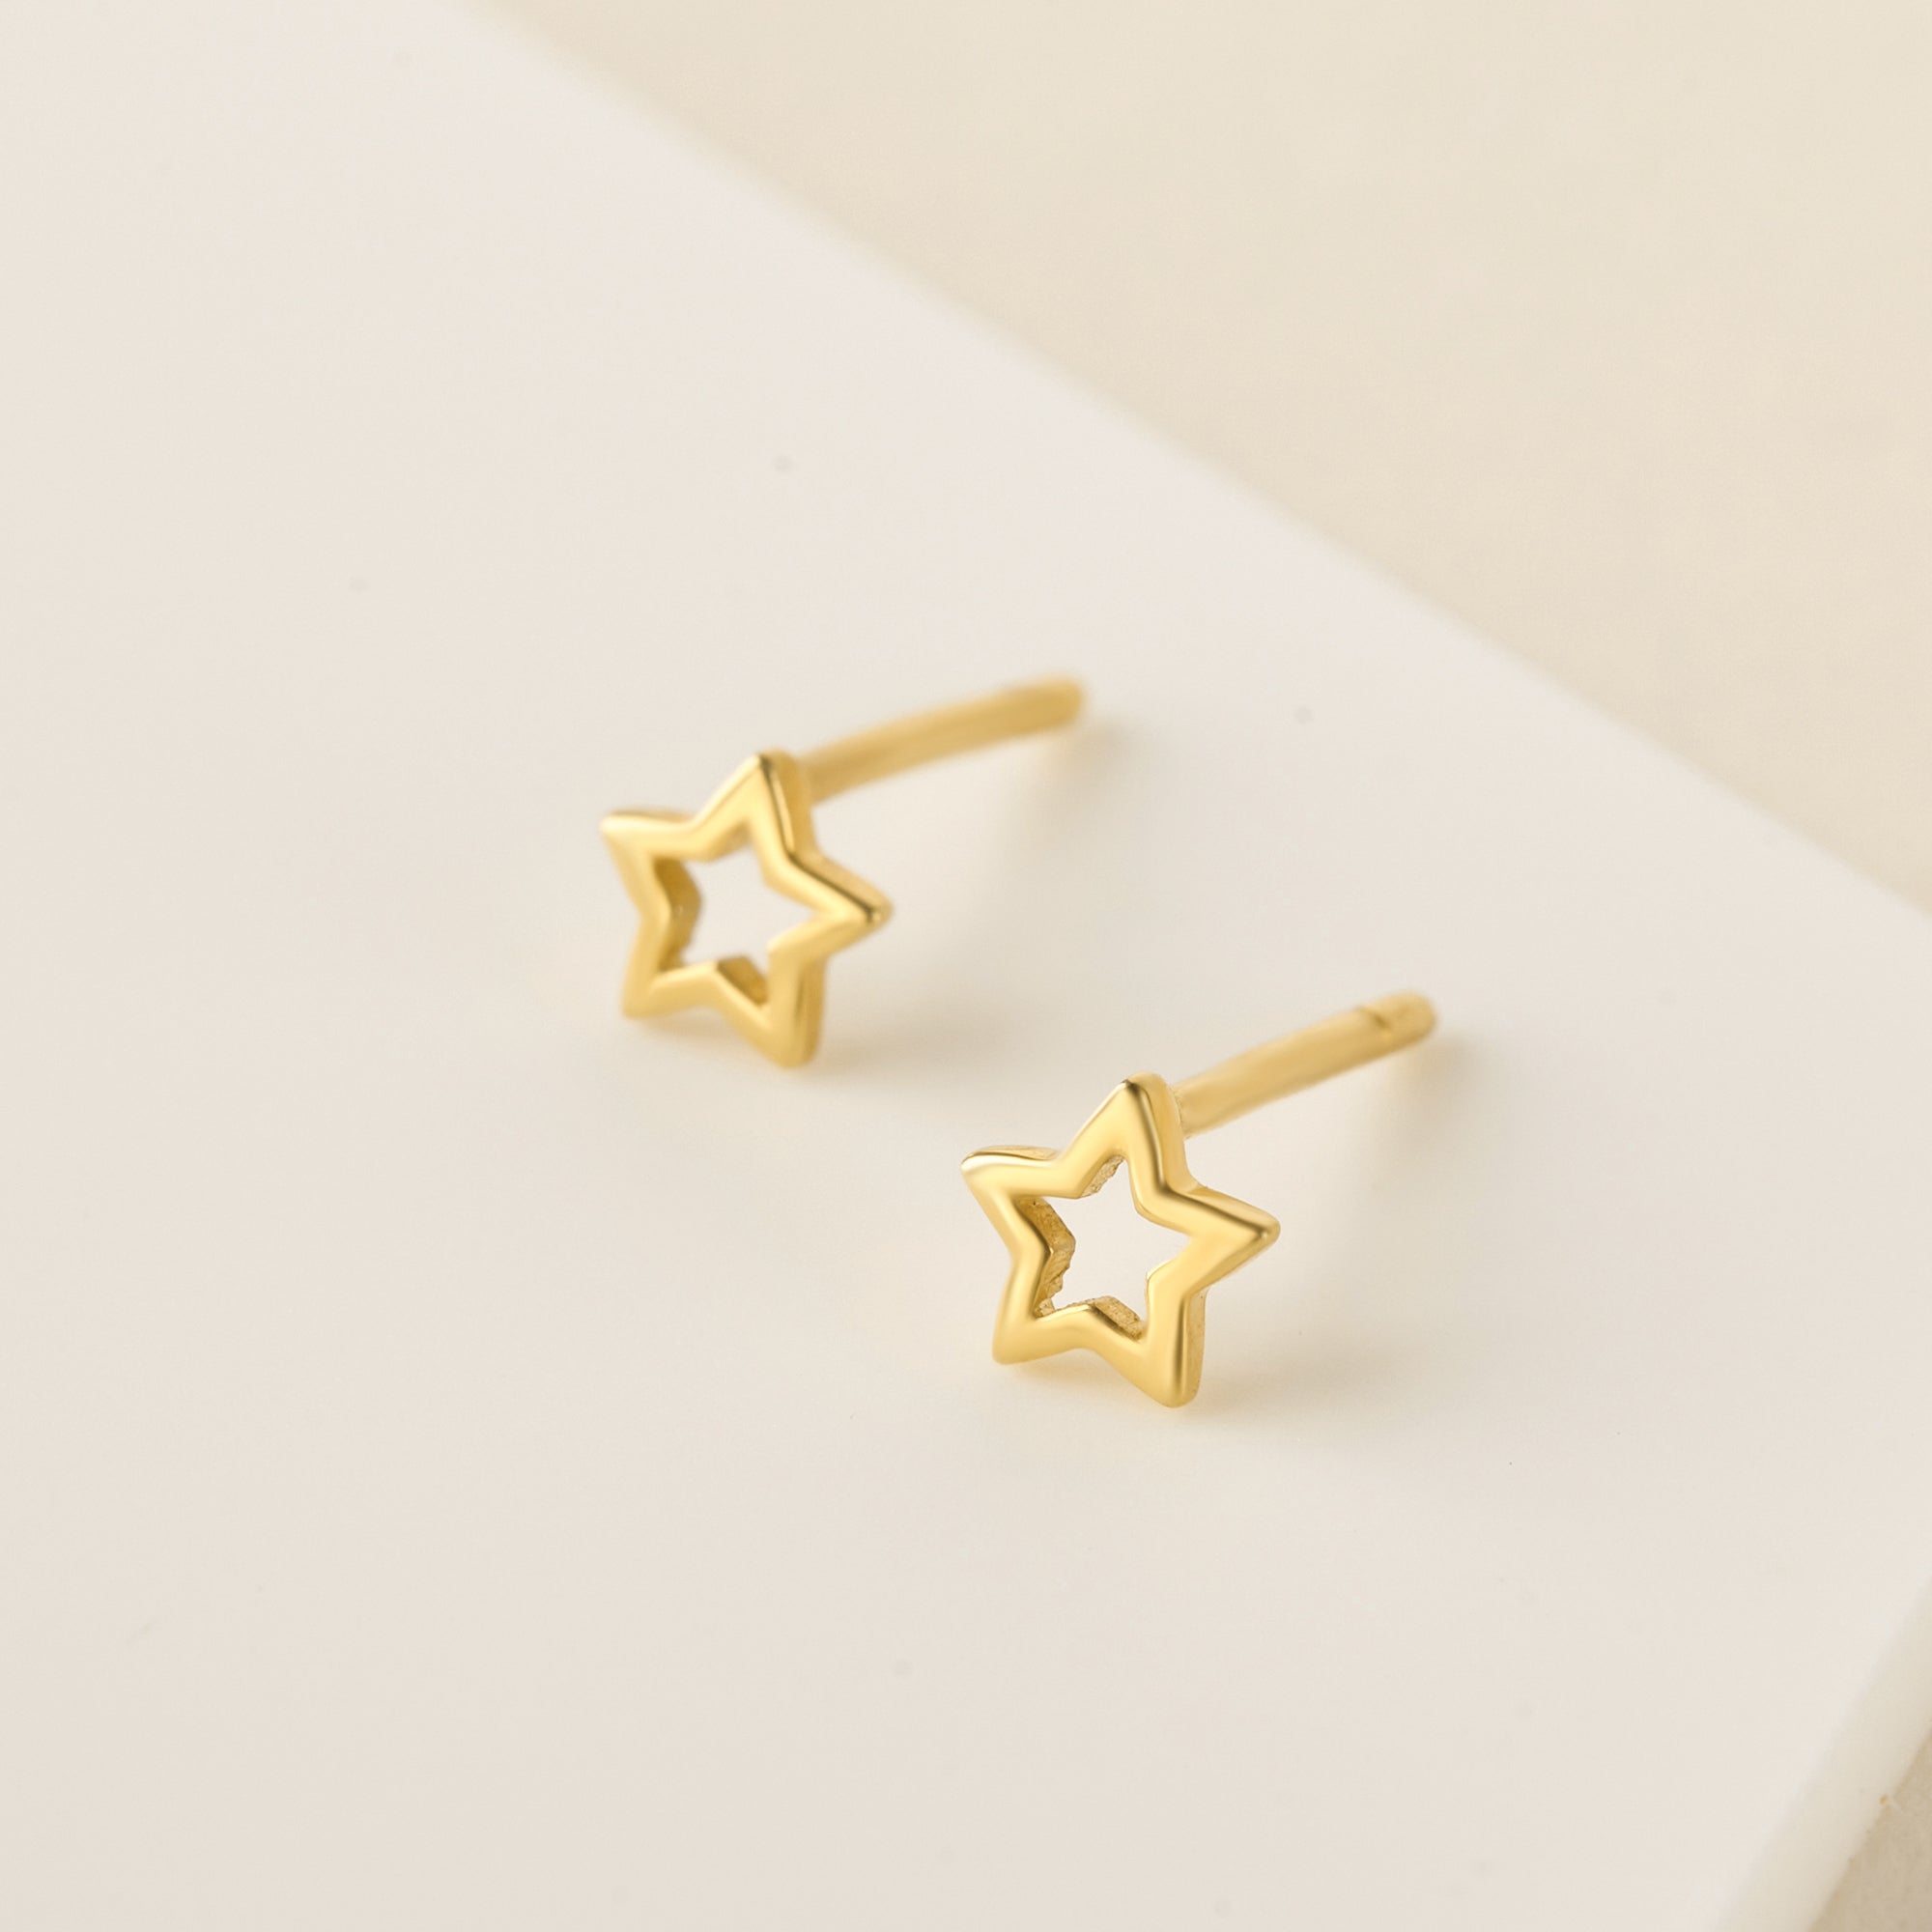 925 Sterling Silver Star-Shaped Earrings - Minimalist and Hypoallergenic Jewelry for Sensitive Skin Bijou Her